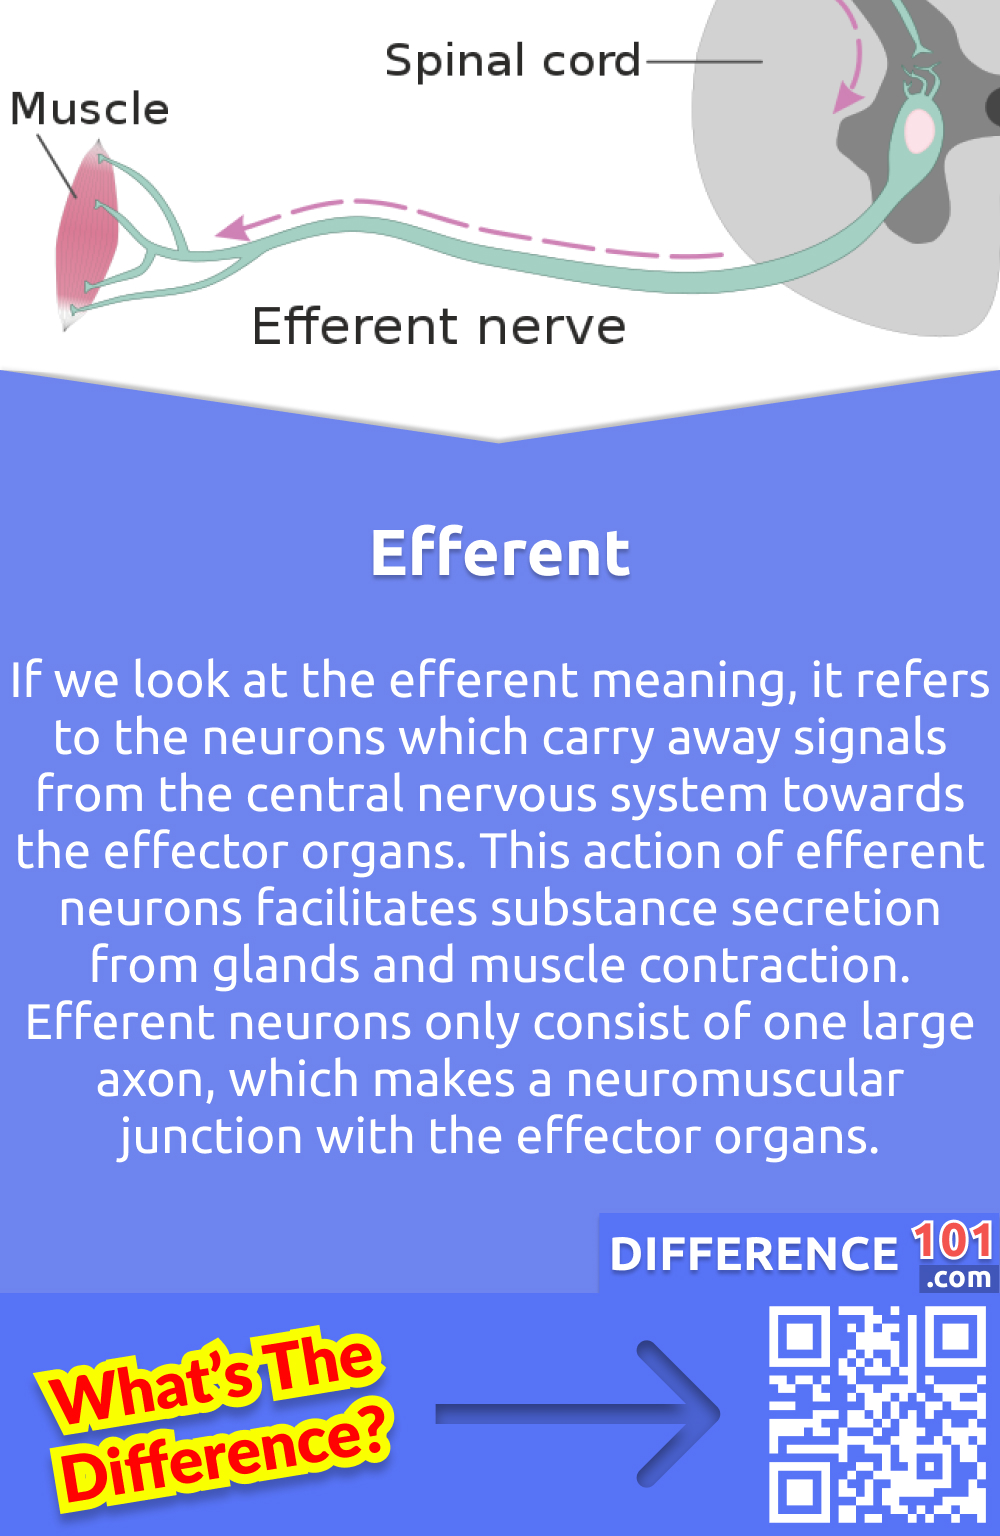 What Is Efferent? If we look at the efferent meaning, it refers to the neurons which carry away signals from the central nervous system towards the effector organs. This action of efferent neurons facilitates substance secretion from glands and muscle contraction. Efferent neurons only consist of one large axon, which makes a neuromuscular junction with the effector organs. Efferent neurons are divided further into different types, like general visceral efferent neurons, special visceral efferent neurons and somatic efferent neurons. There are further types of somatic neurons, alpha motor neurons and beta motor neurons. All these neurons help in carrying signals to the organs. For example, if a person is walking on the road and sees a bike coming towards him, he will suddenly jump on the side or make a side immediately. That is because efferent neurons immediately carry signals from the brain to the leg muscles to move out of the way.